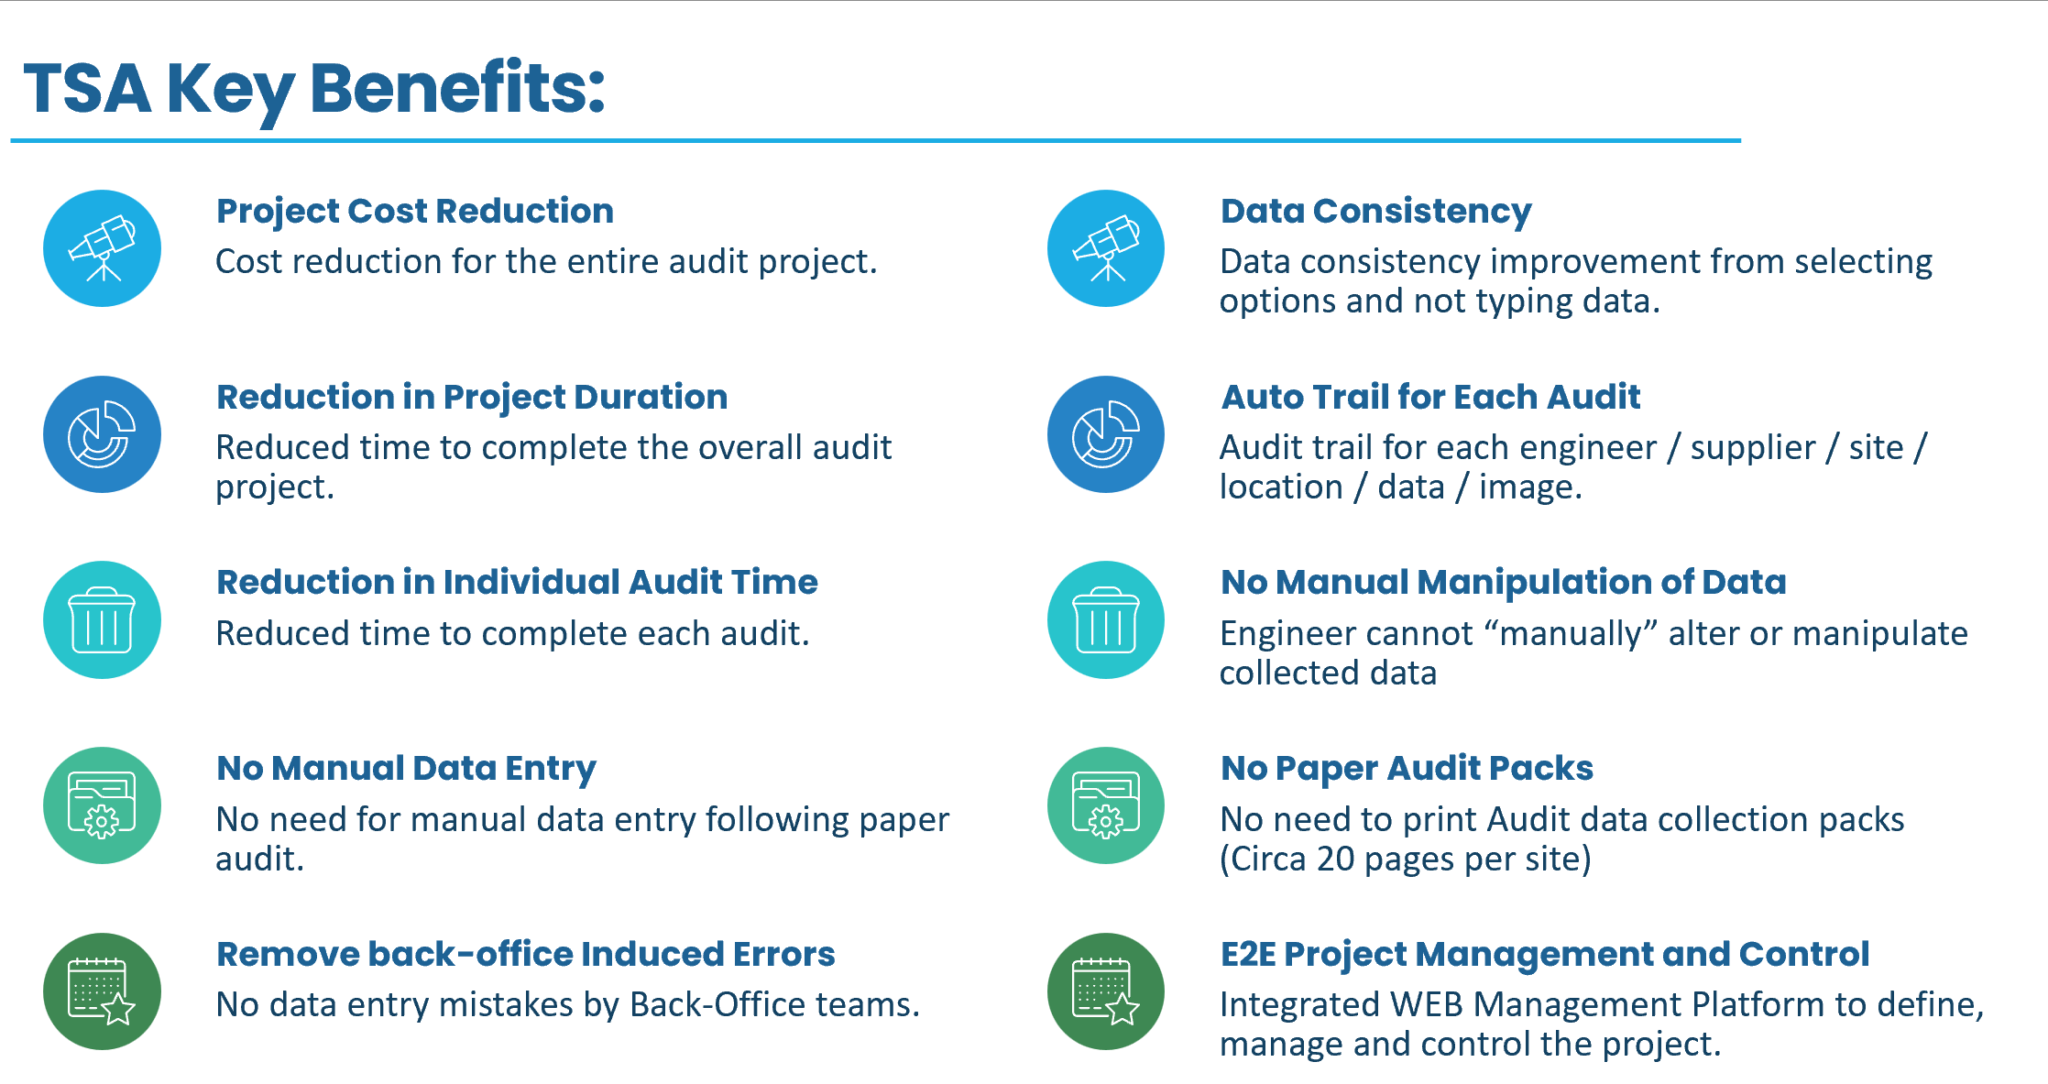 Problems and Challenges in Site Audit Projects